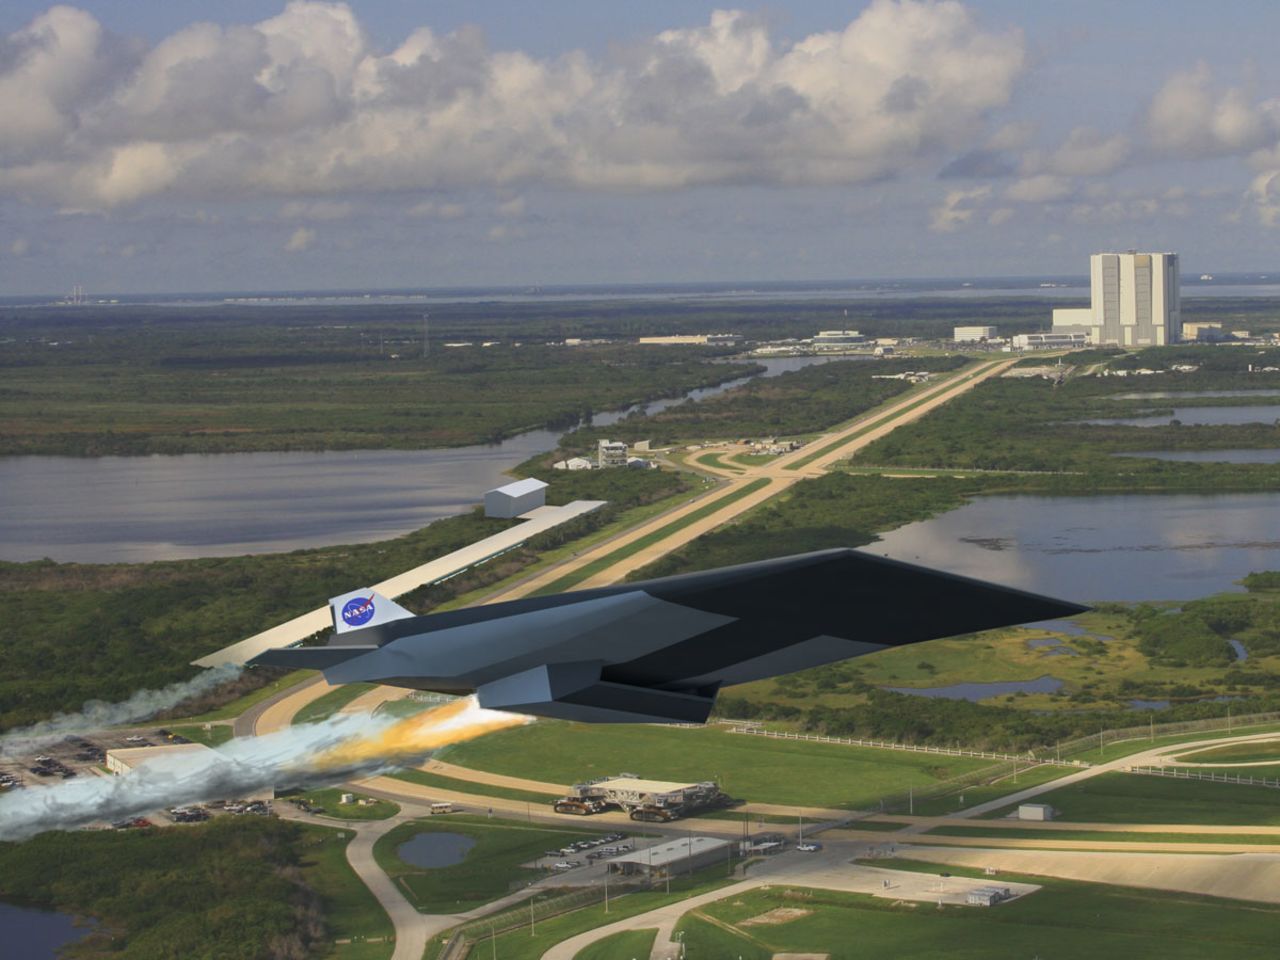 An artist's impression shows a potential design for a rail-launched aircraft and spacecraft. Early designs envision a 2-mile-long track at Kennedy Space Center shooting a Mach 10-capable carrier aircraft to the upper reaches of the atmosphere.